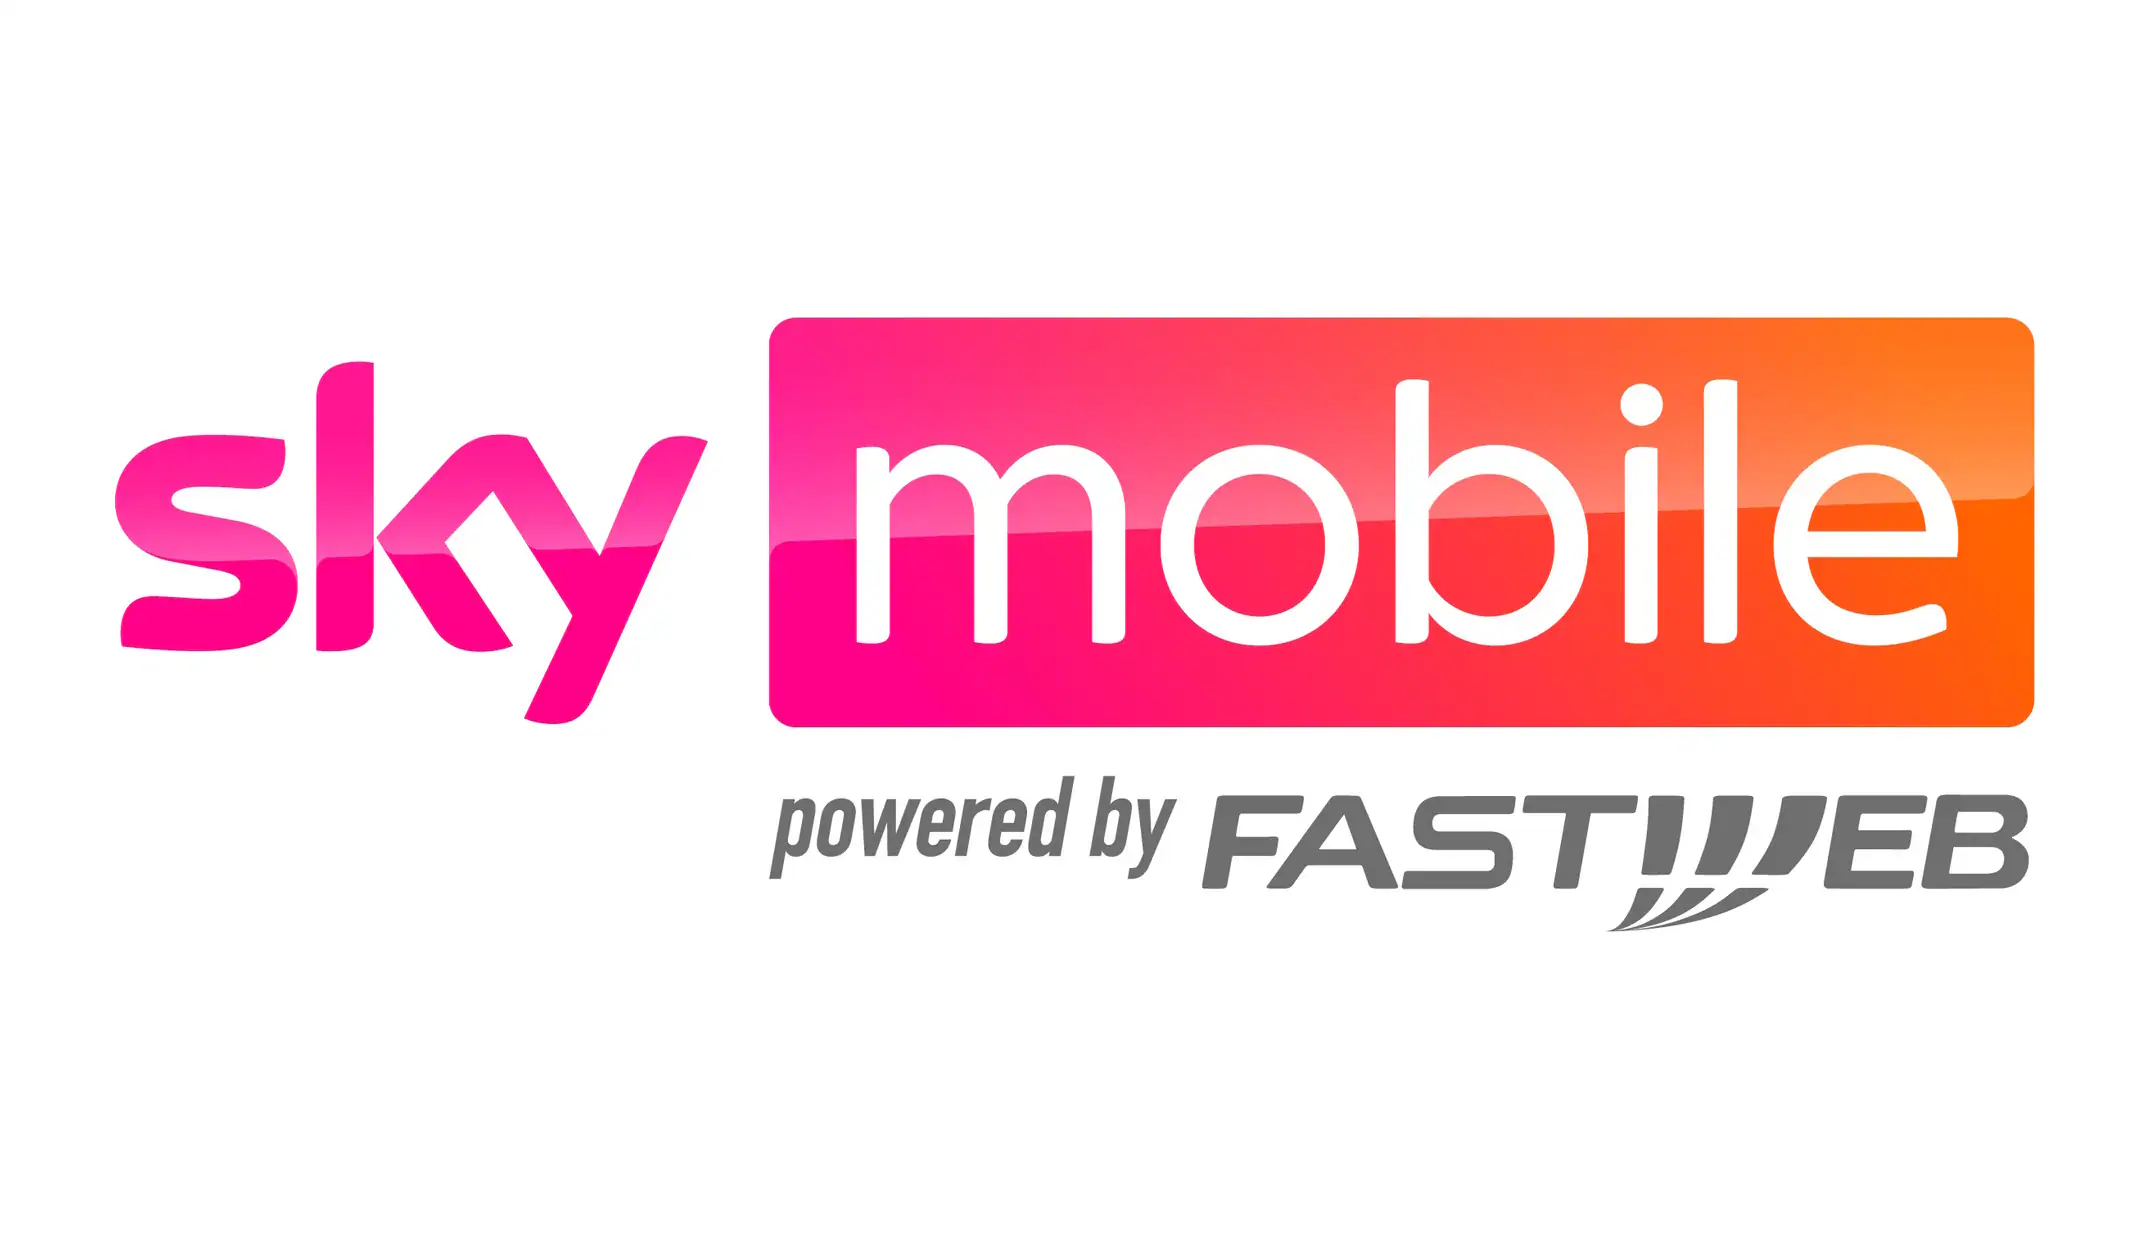 Sky and Fastweb sign a multi-year agreement to launch Sky Mobile powered by Fastweb in Italy